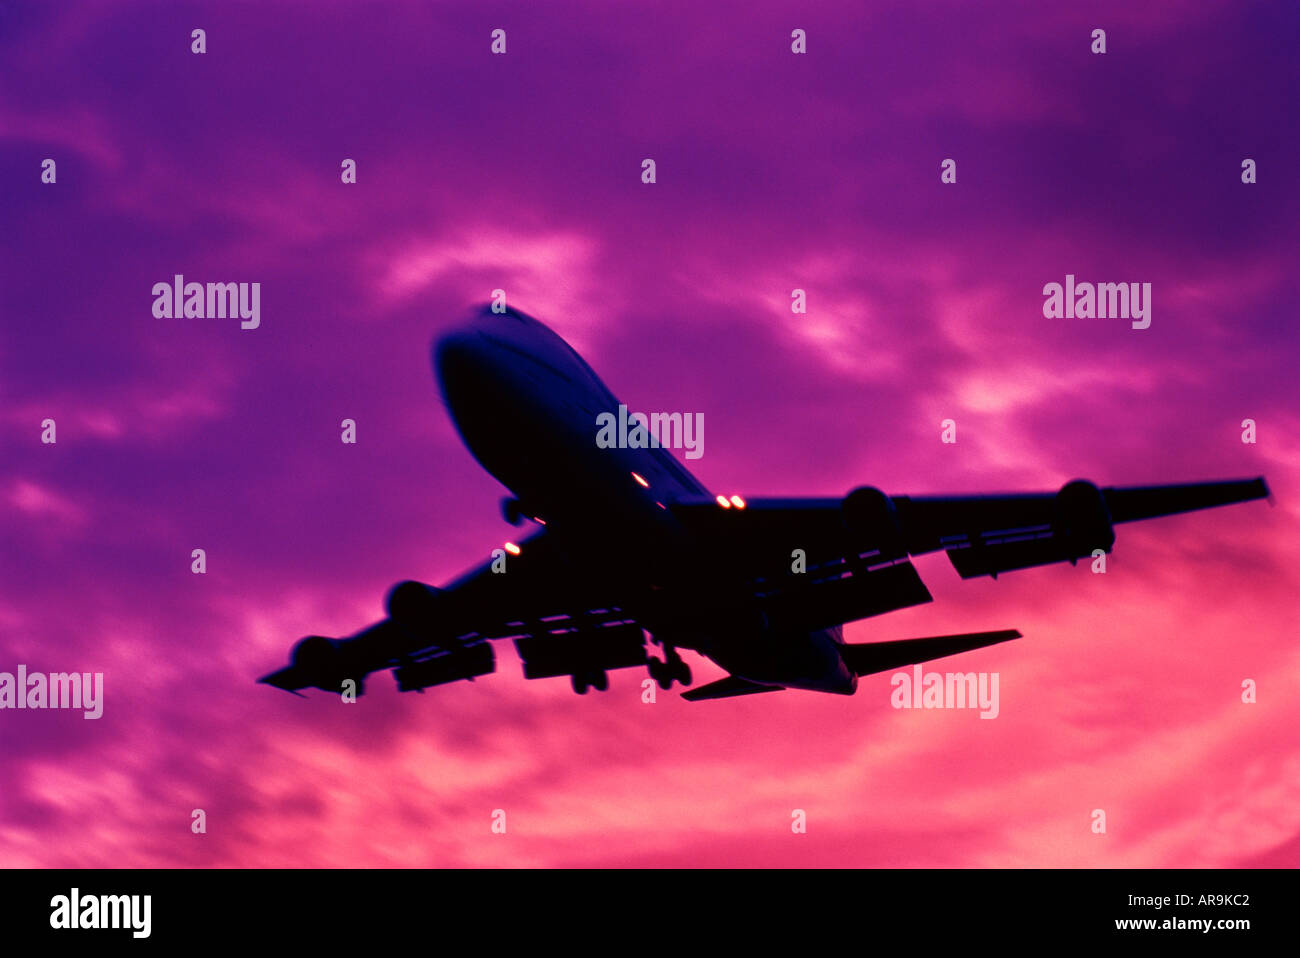 Boeing 747 jumbo jet airliner flying in the air Stock Photo